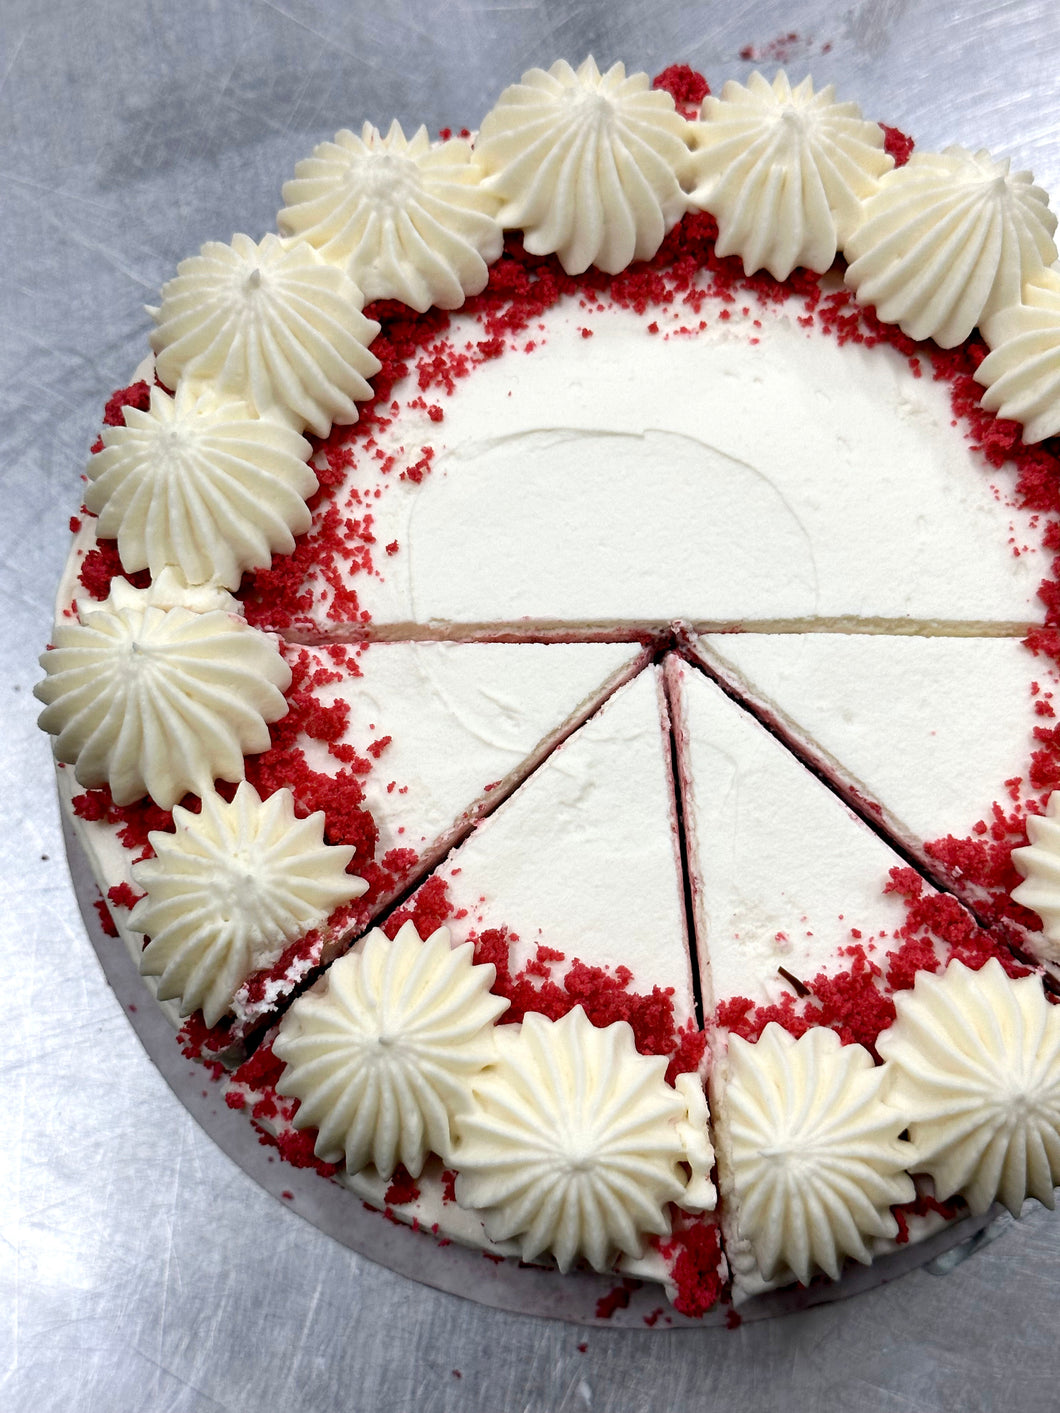 IN STORE ONLY - Keto Red Velvet Cake - By the Slice - Gluten Free, Sugar Free, Low Carb, Keto & Diabetic Friendly